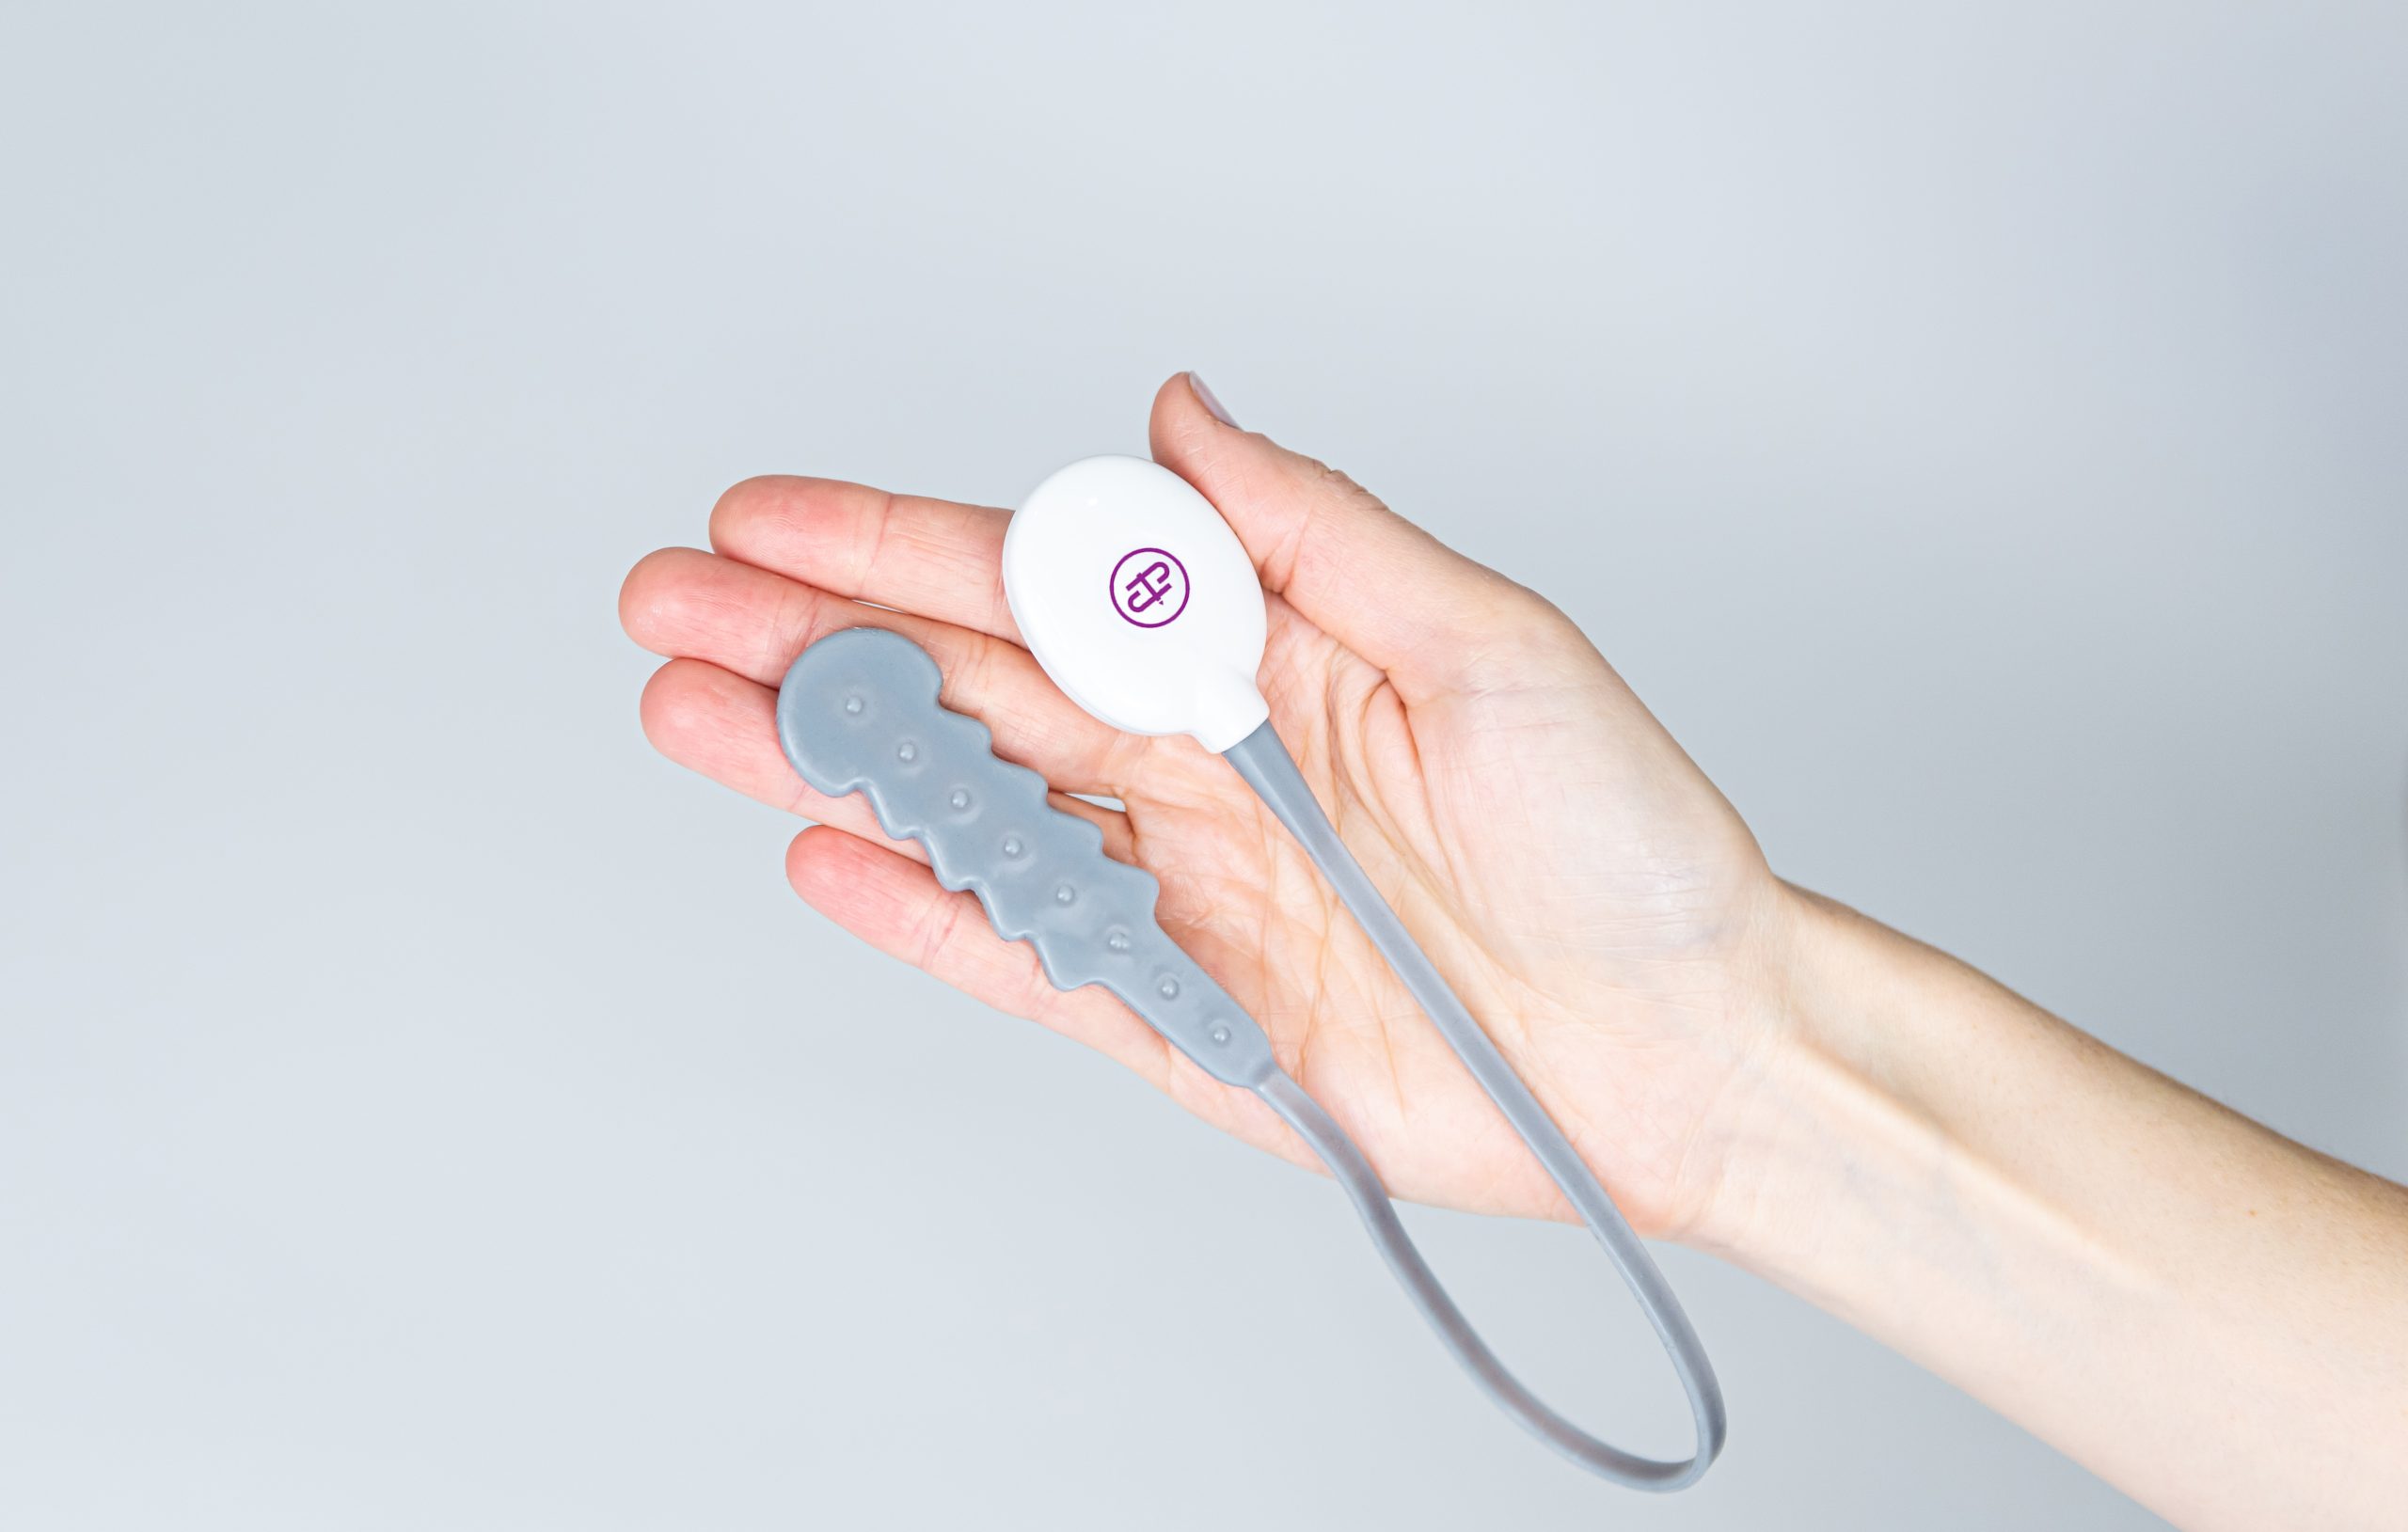 Medical equipment supplier JUNOFEM applies for FDA approval for ‘femfit’ female incontinence device in the United States